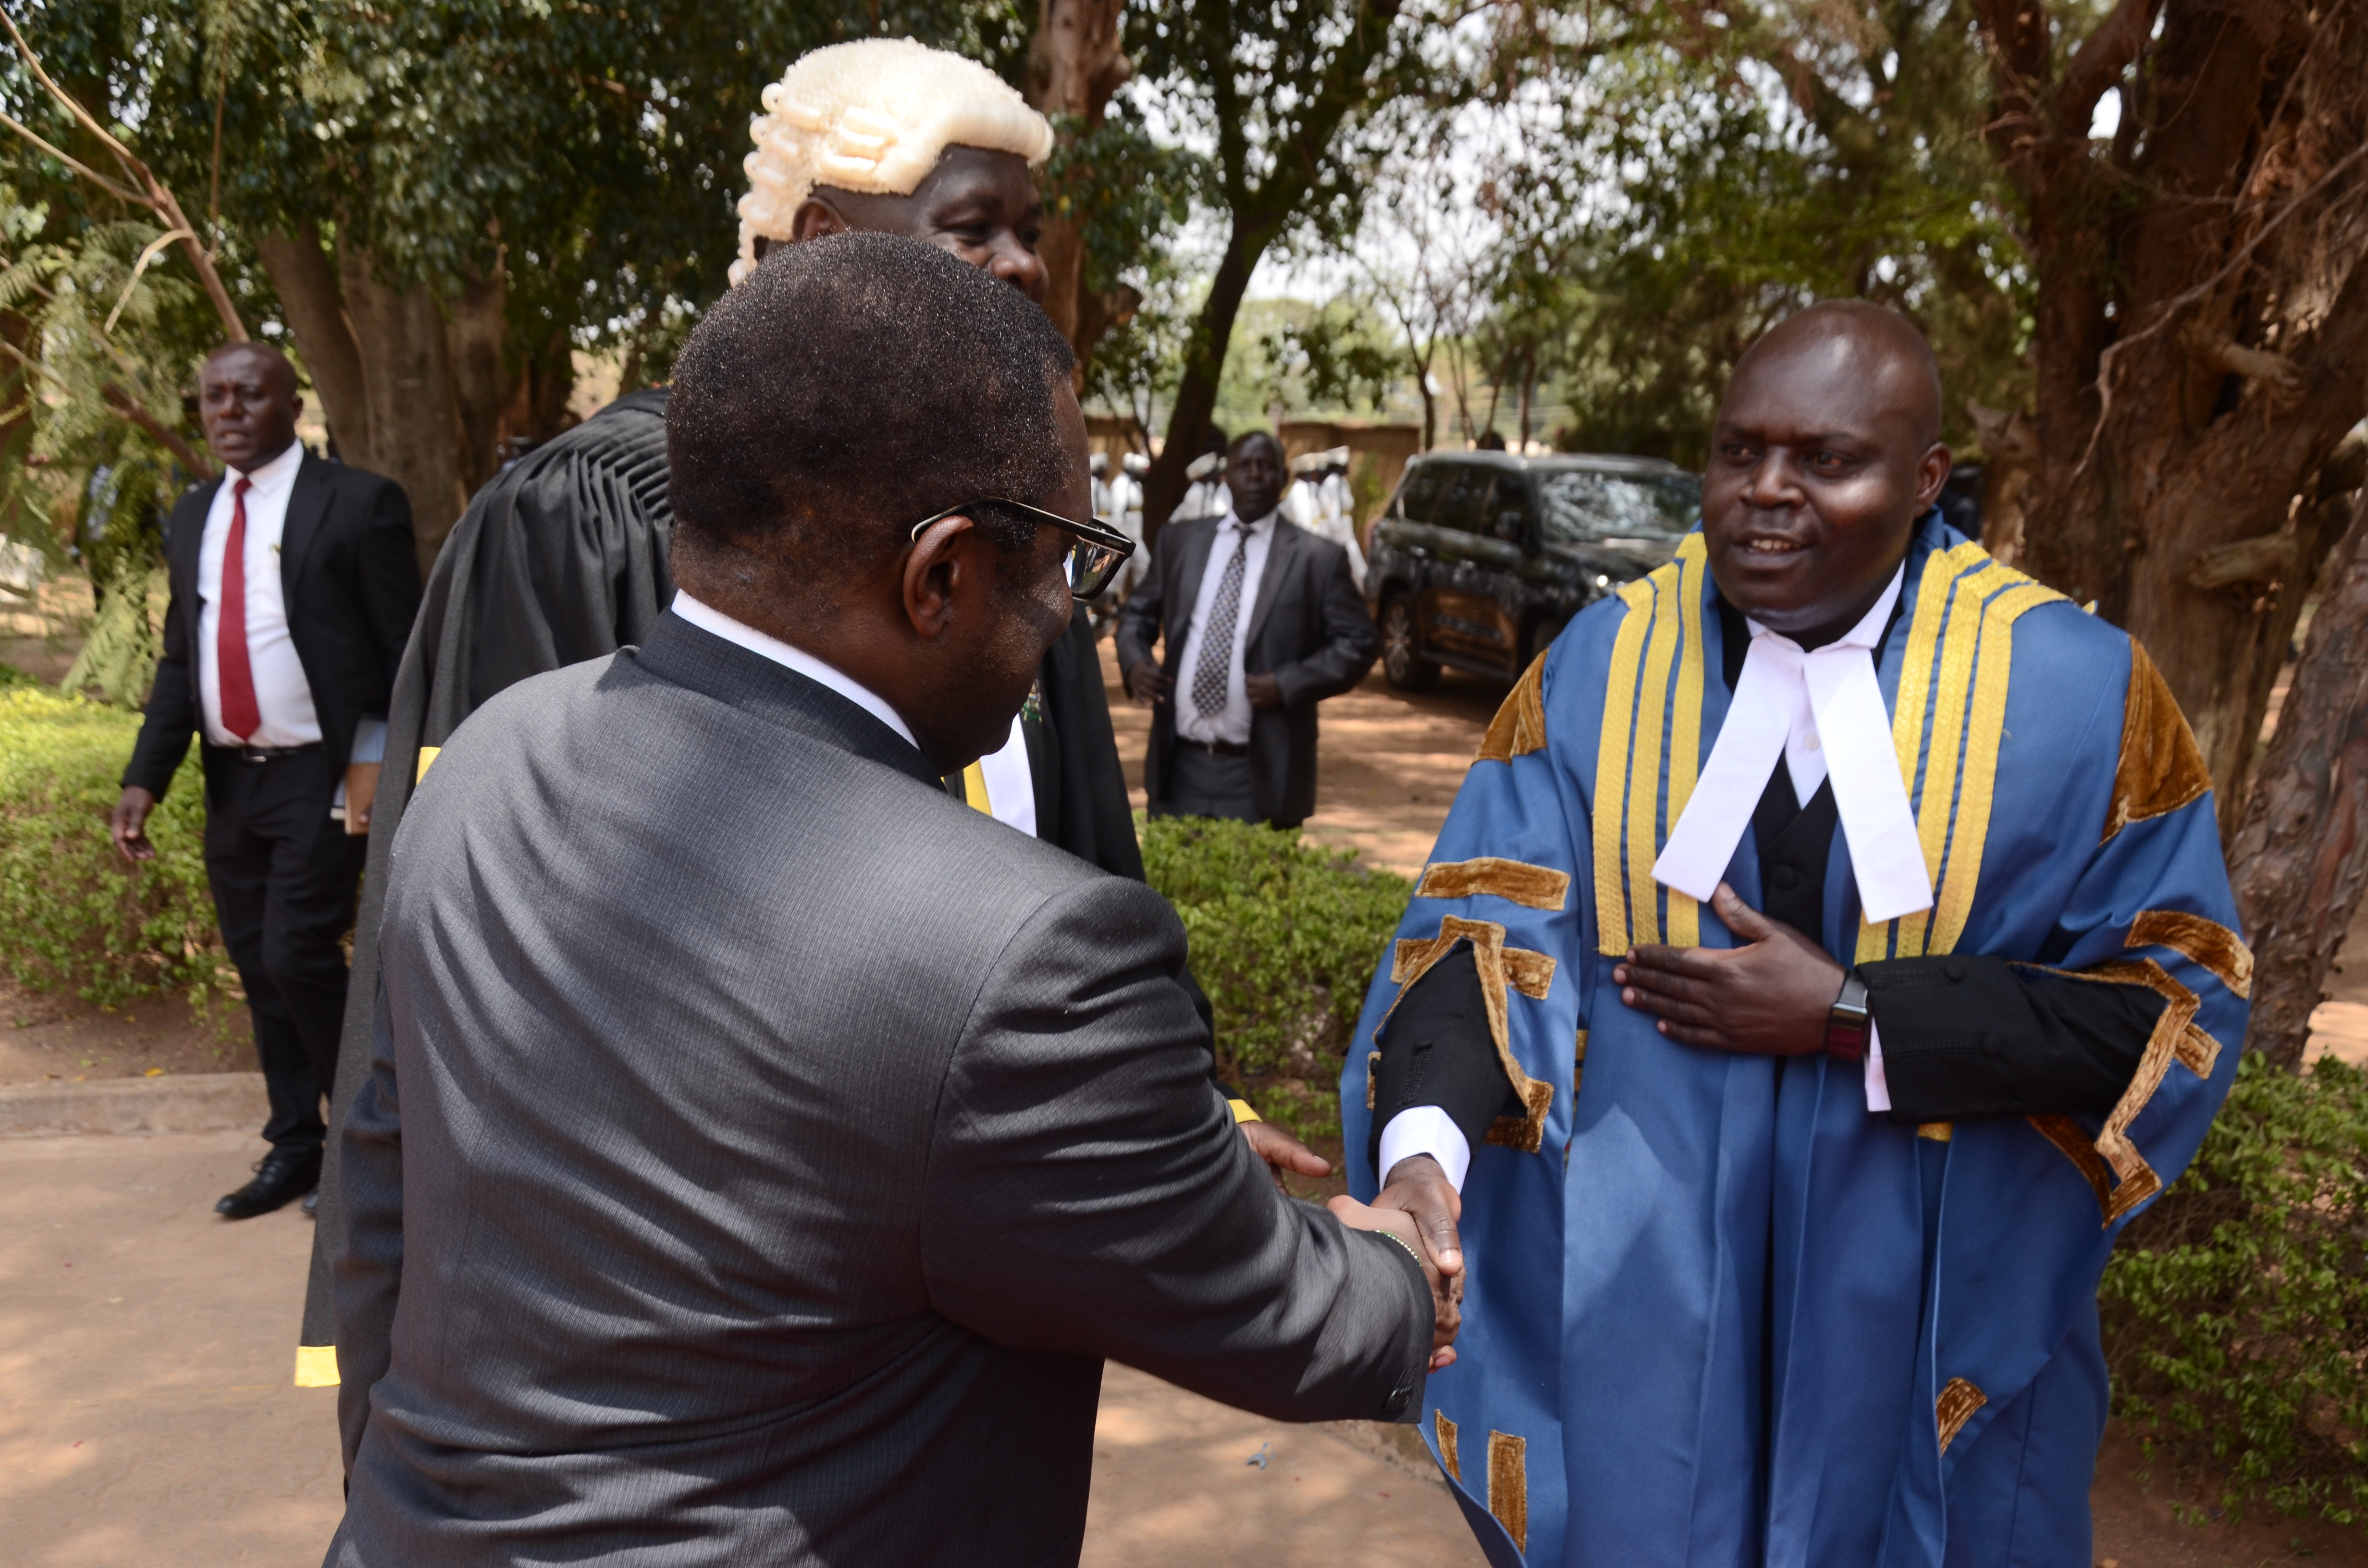 The Hon. Speaker and the Clerk receive H.E. The Governor at the Assembly precincts ahead of the State of the County Address